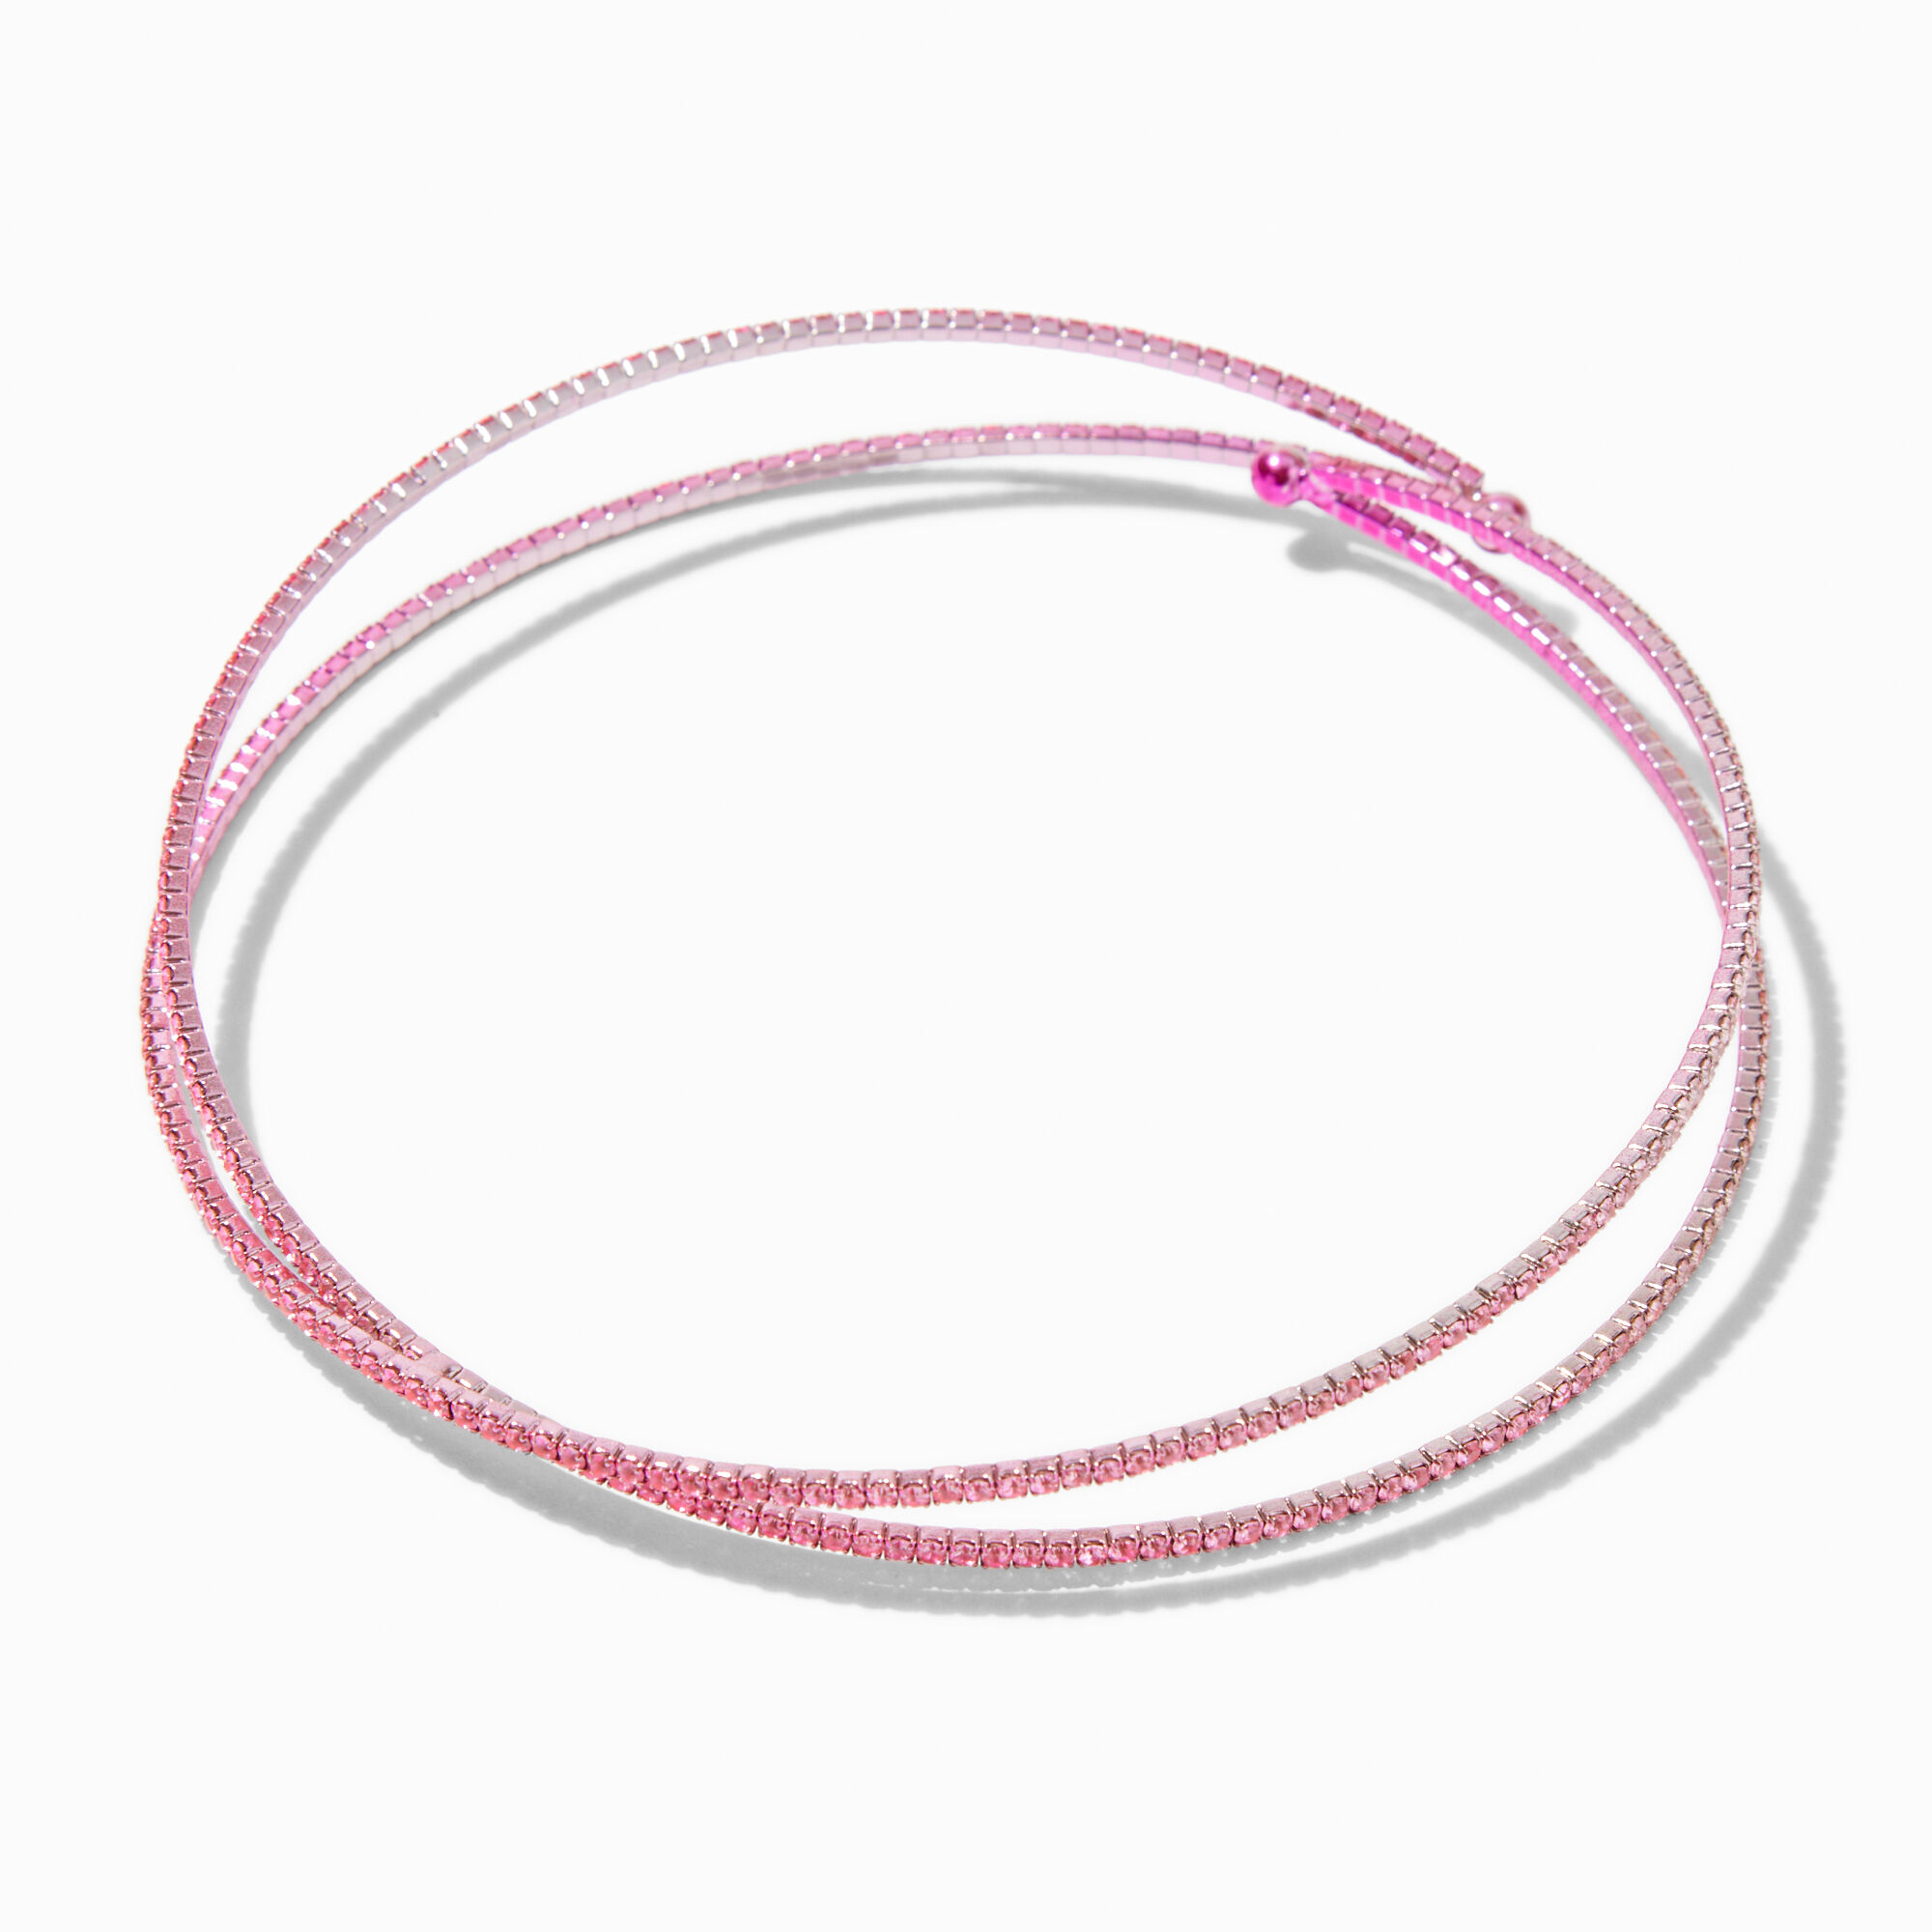 View Claires Anodized Cross Over Rigid Choker Necklace Pink information